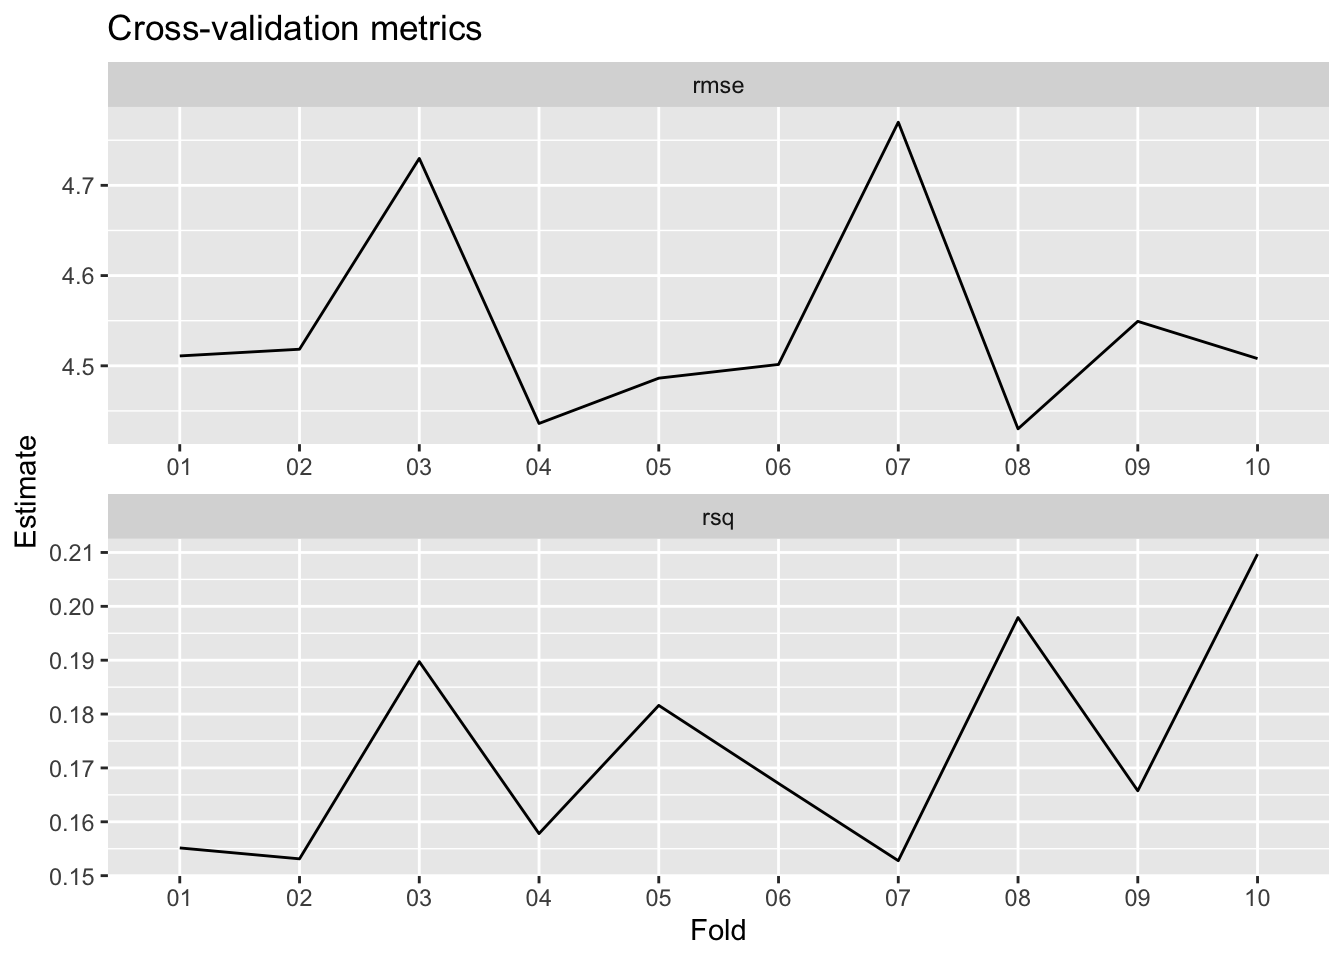 Faceted line plot of cross-validation metrics. On top is RMSE and on the bottom is R-squared. The x-axis shows 10 folds and the y-axis shows the relevant metric estimate. R-squared values range from 15% to 21%. RMSE values range from roughly 4.4 to 4.75.